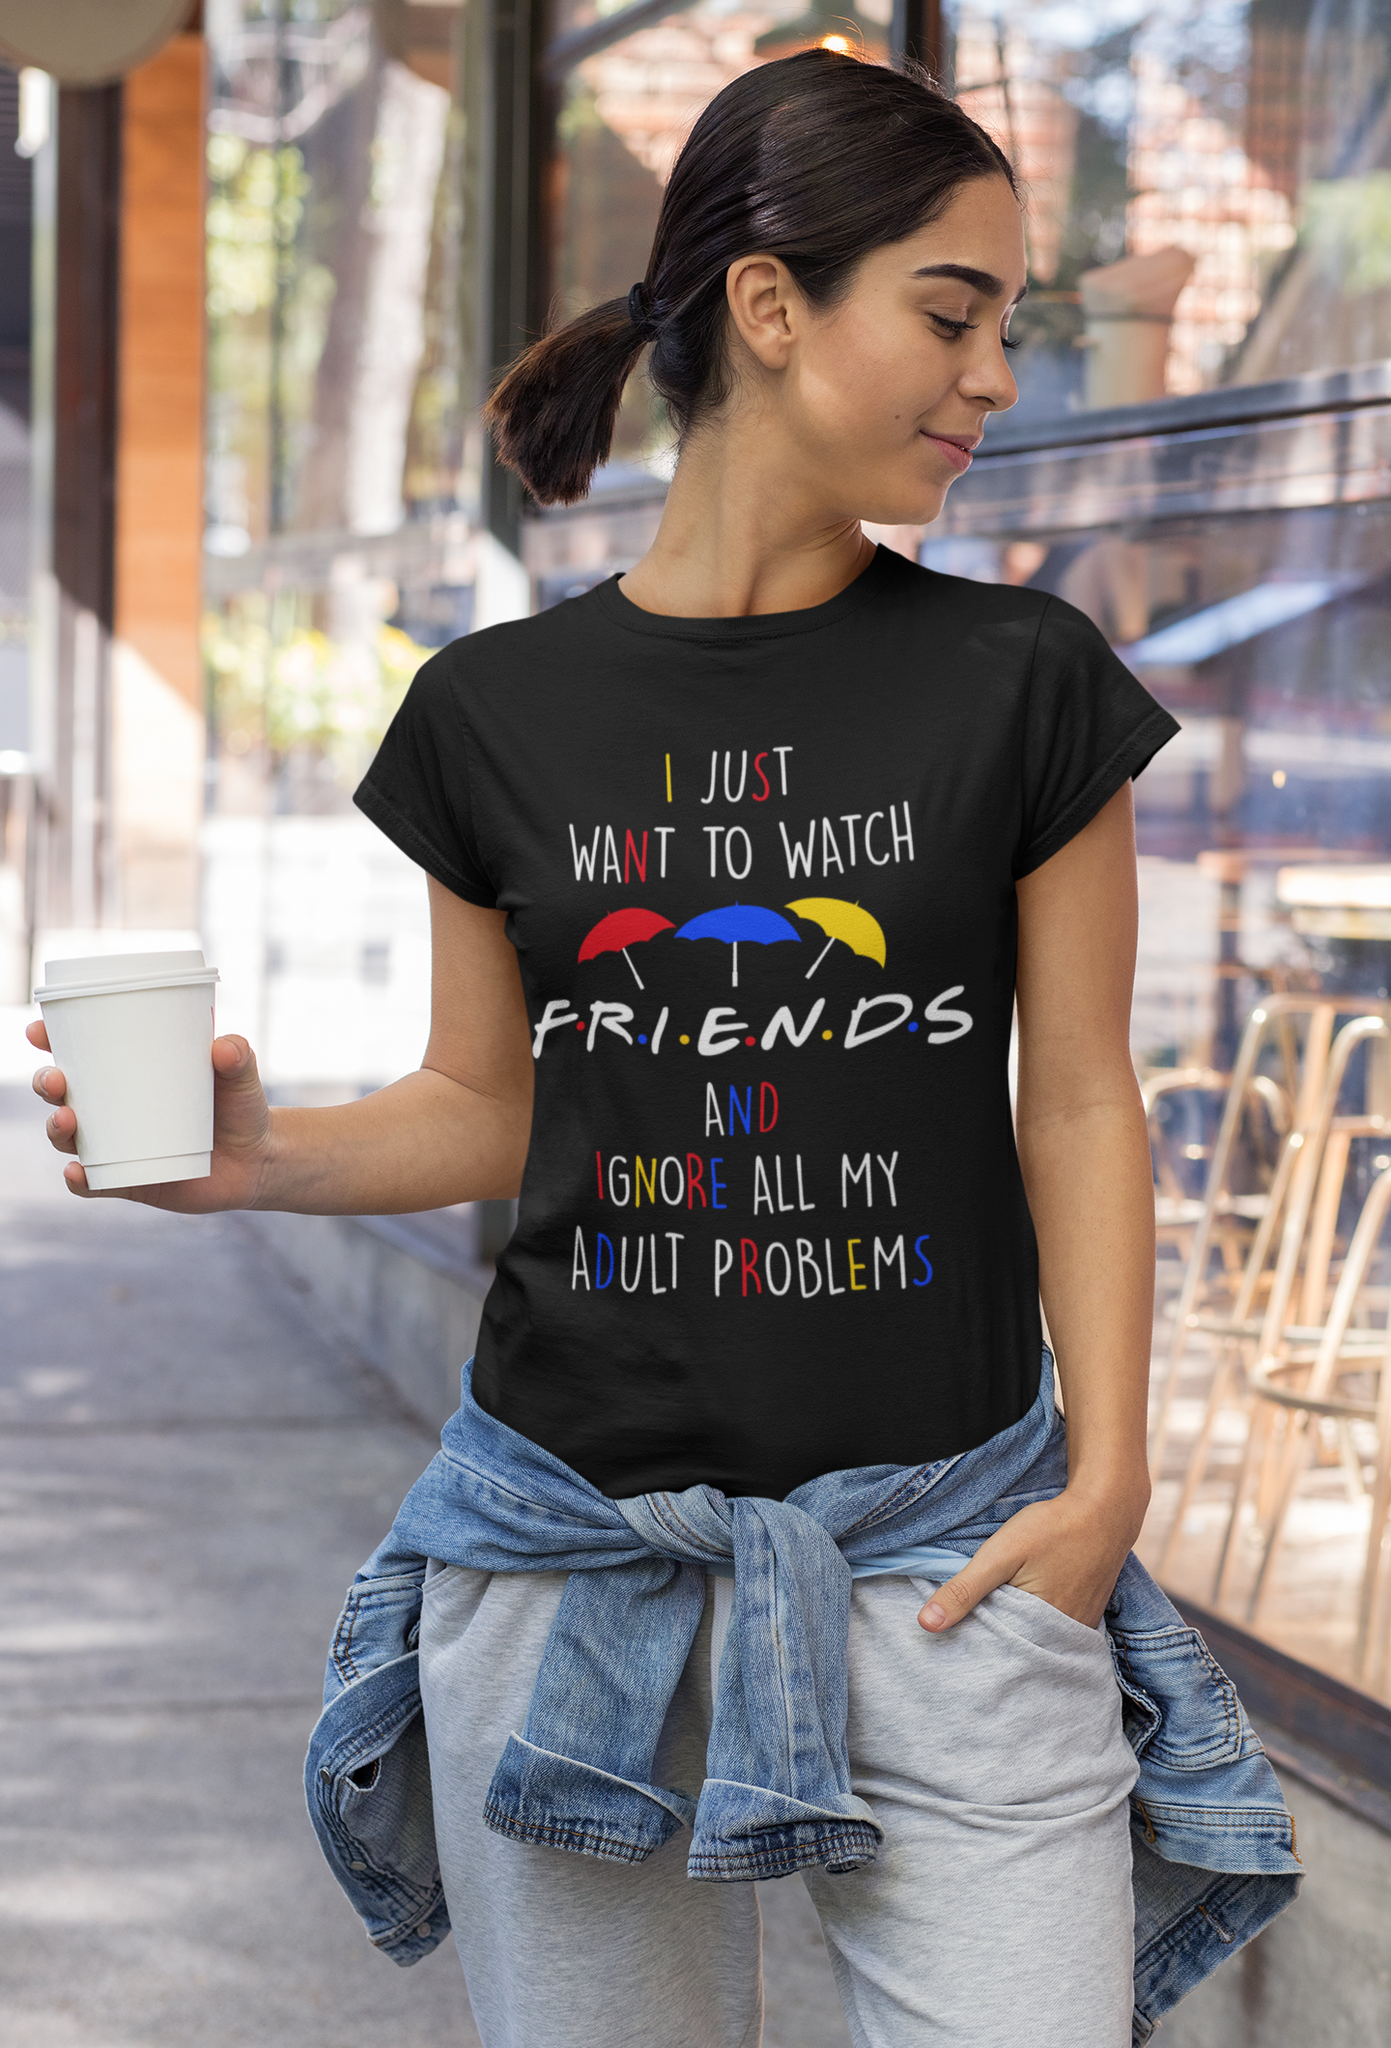 Friends TV Show T Shirt, Friends Shirt, I Just Want To Watch Friends T Shirt, Ignore All My Adult Problems Tshirt